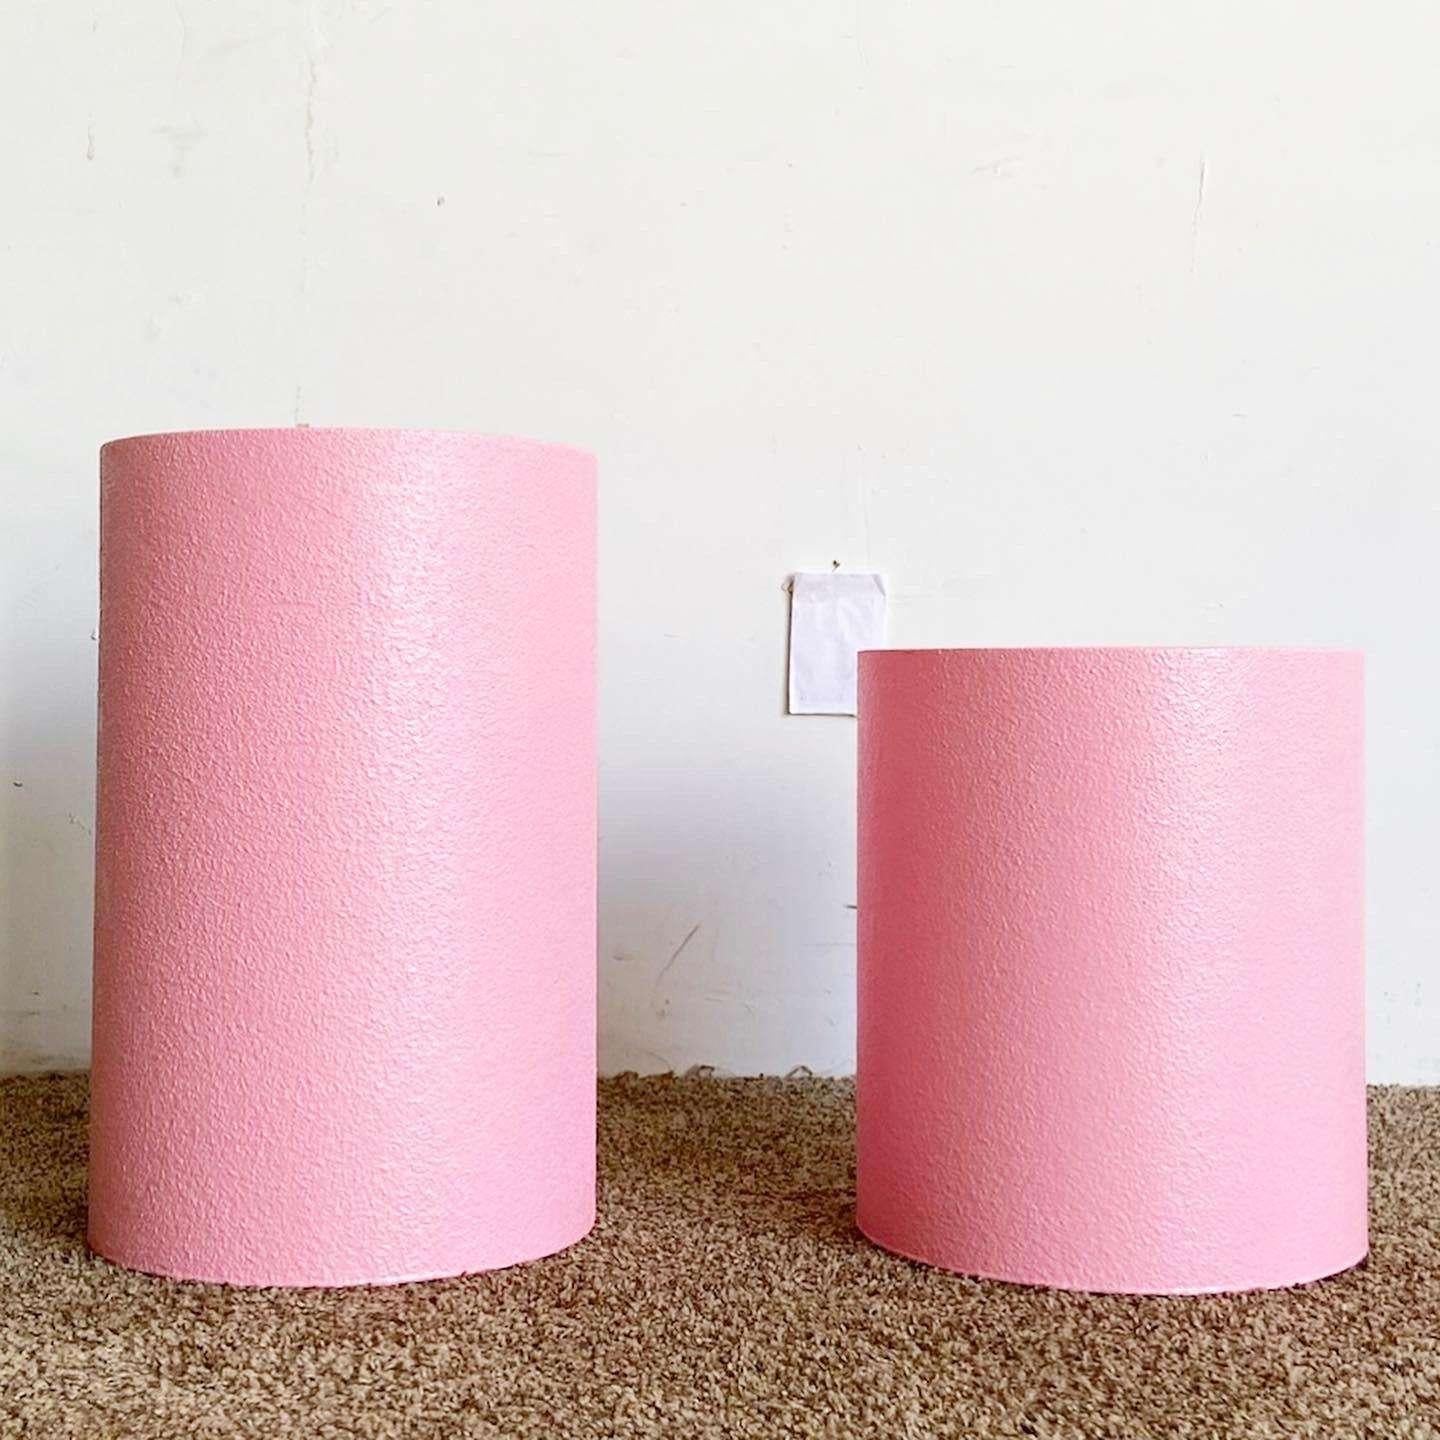 Amazing vintage pair of postmodern cylindrical pedestals. Each feature a bubble gum pink testified finish.

Small pedestal measures 15”H